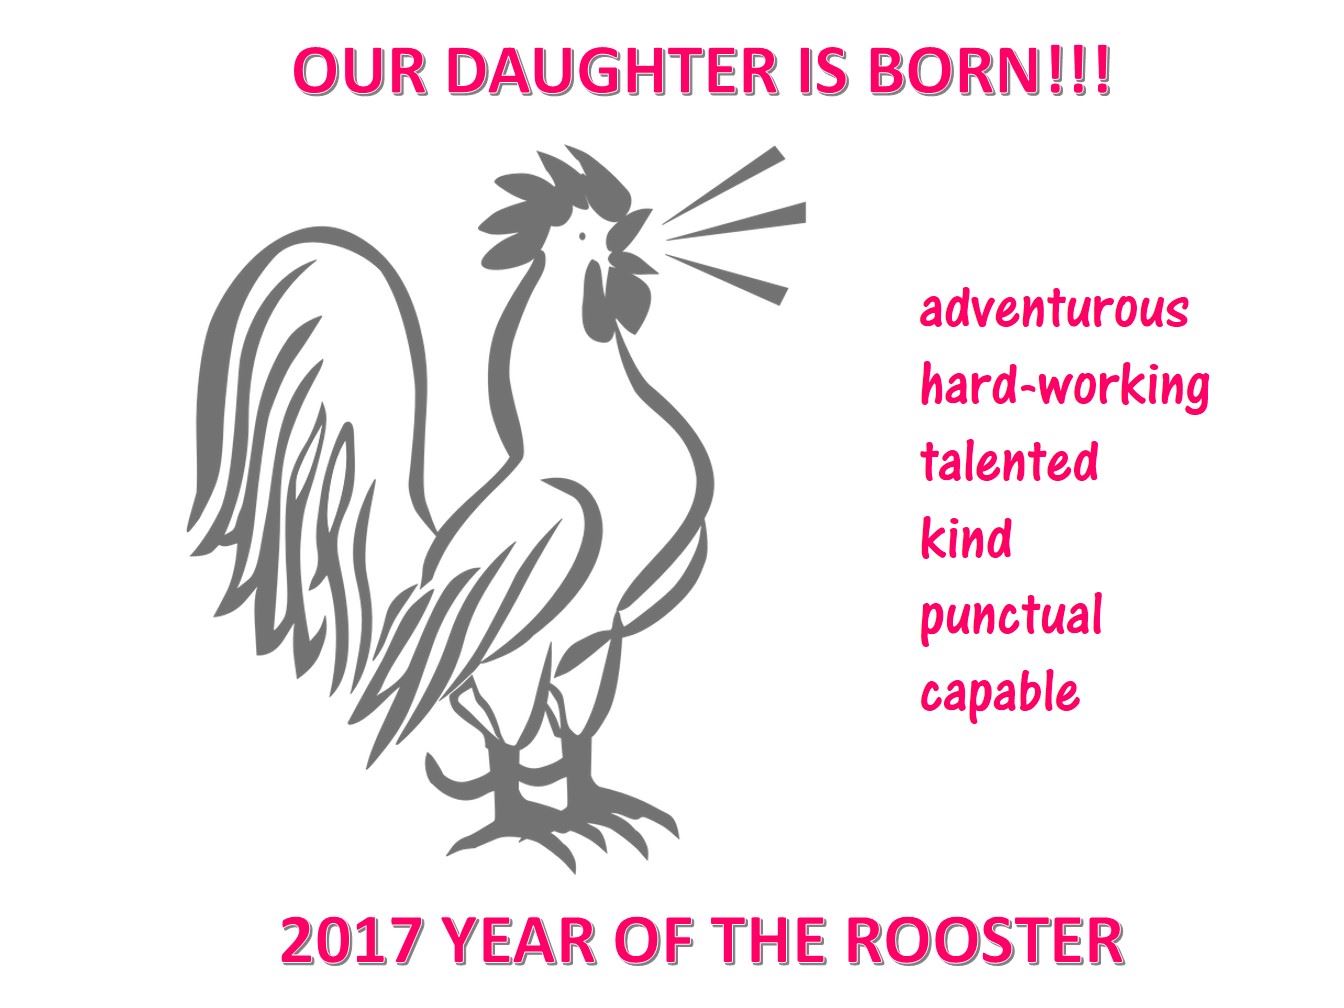 Daughter born Chinese year of rooster poster main image